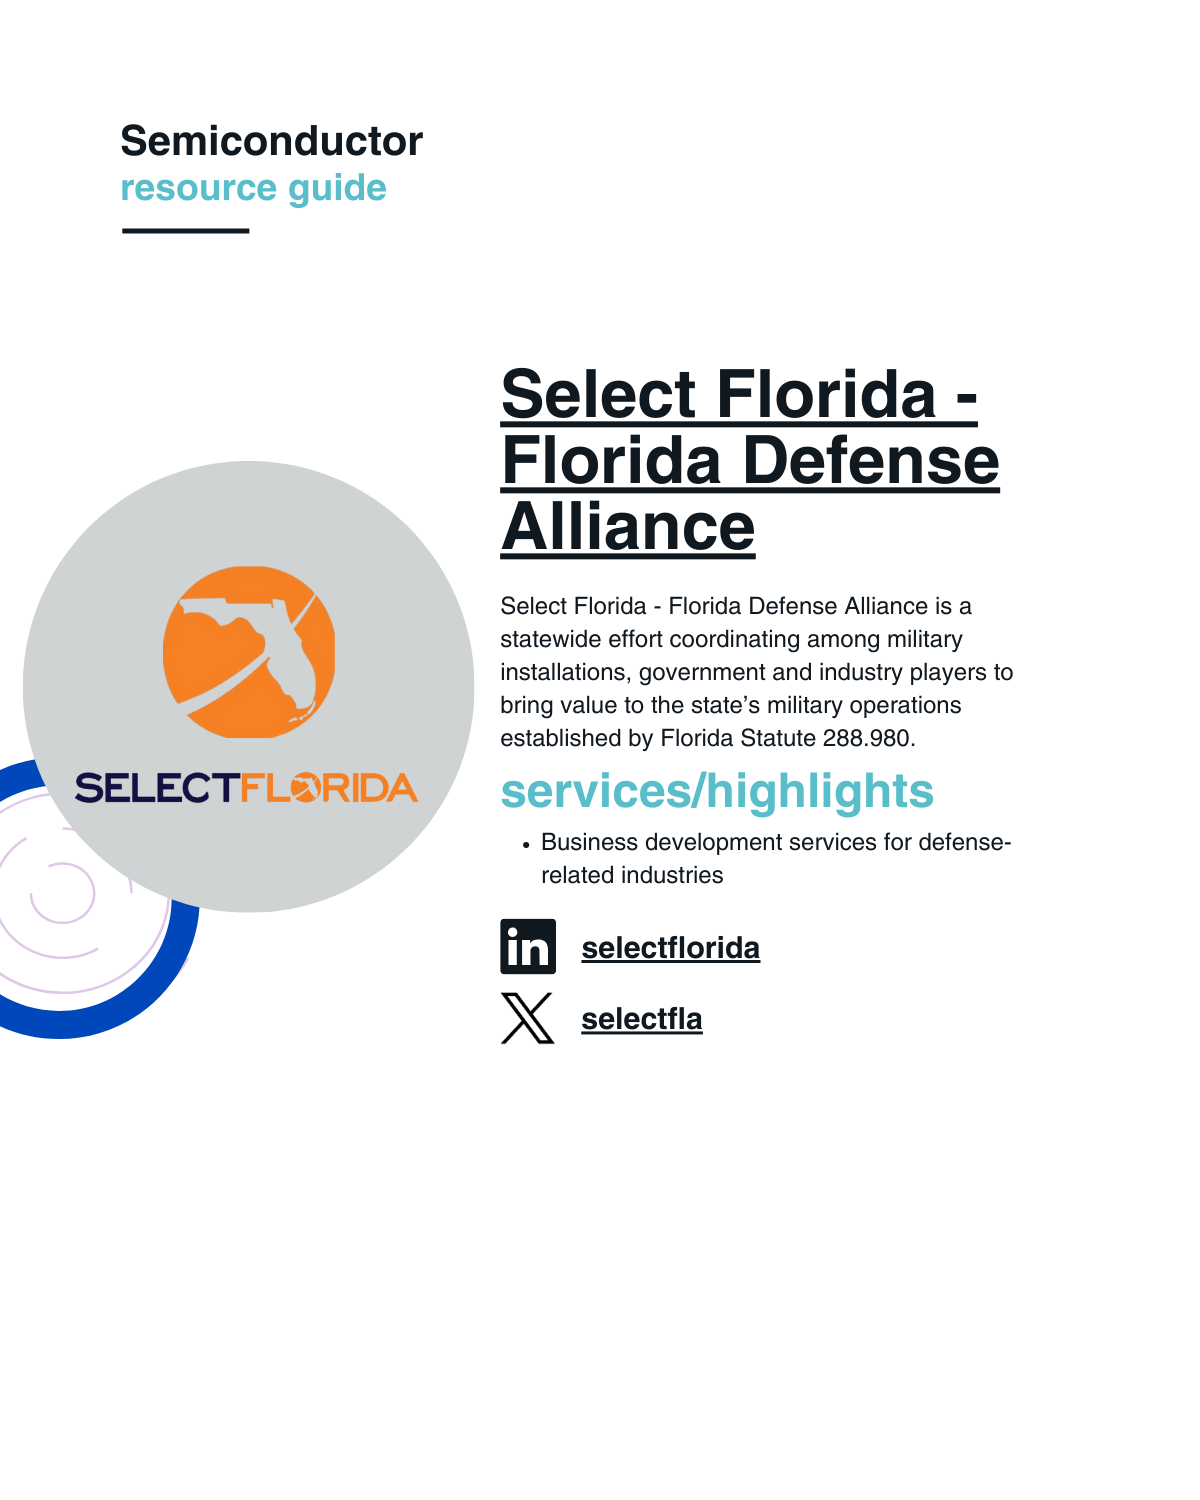 Select Florida - Florida Defense Alliance is a statewide effort coordinating among military installations, government and industry players to bring value to the state’s military operations established by Florida Statute 288.980.